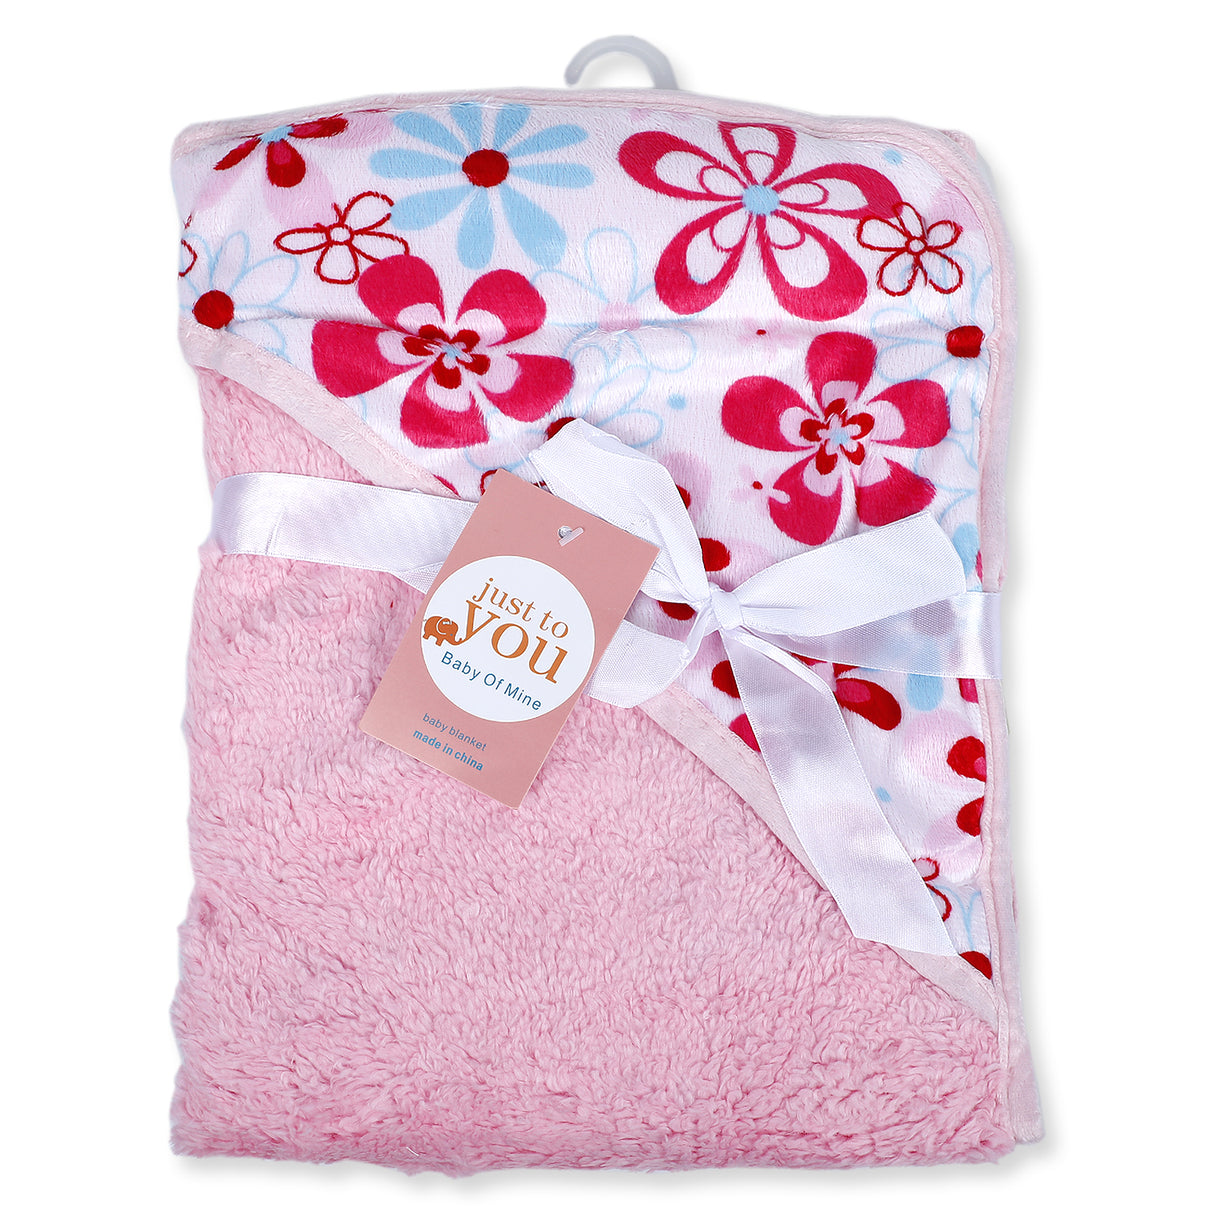 Just to You Flower Adorable Blanket